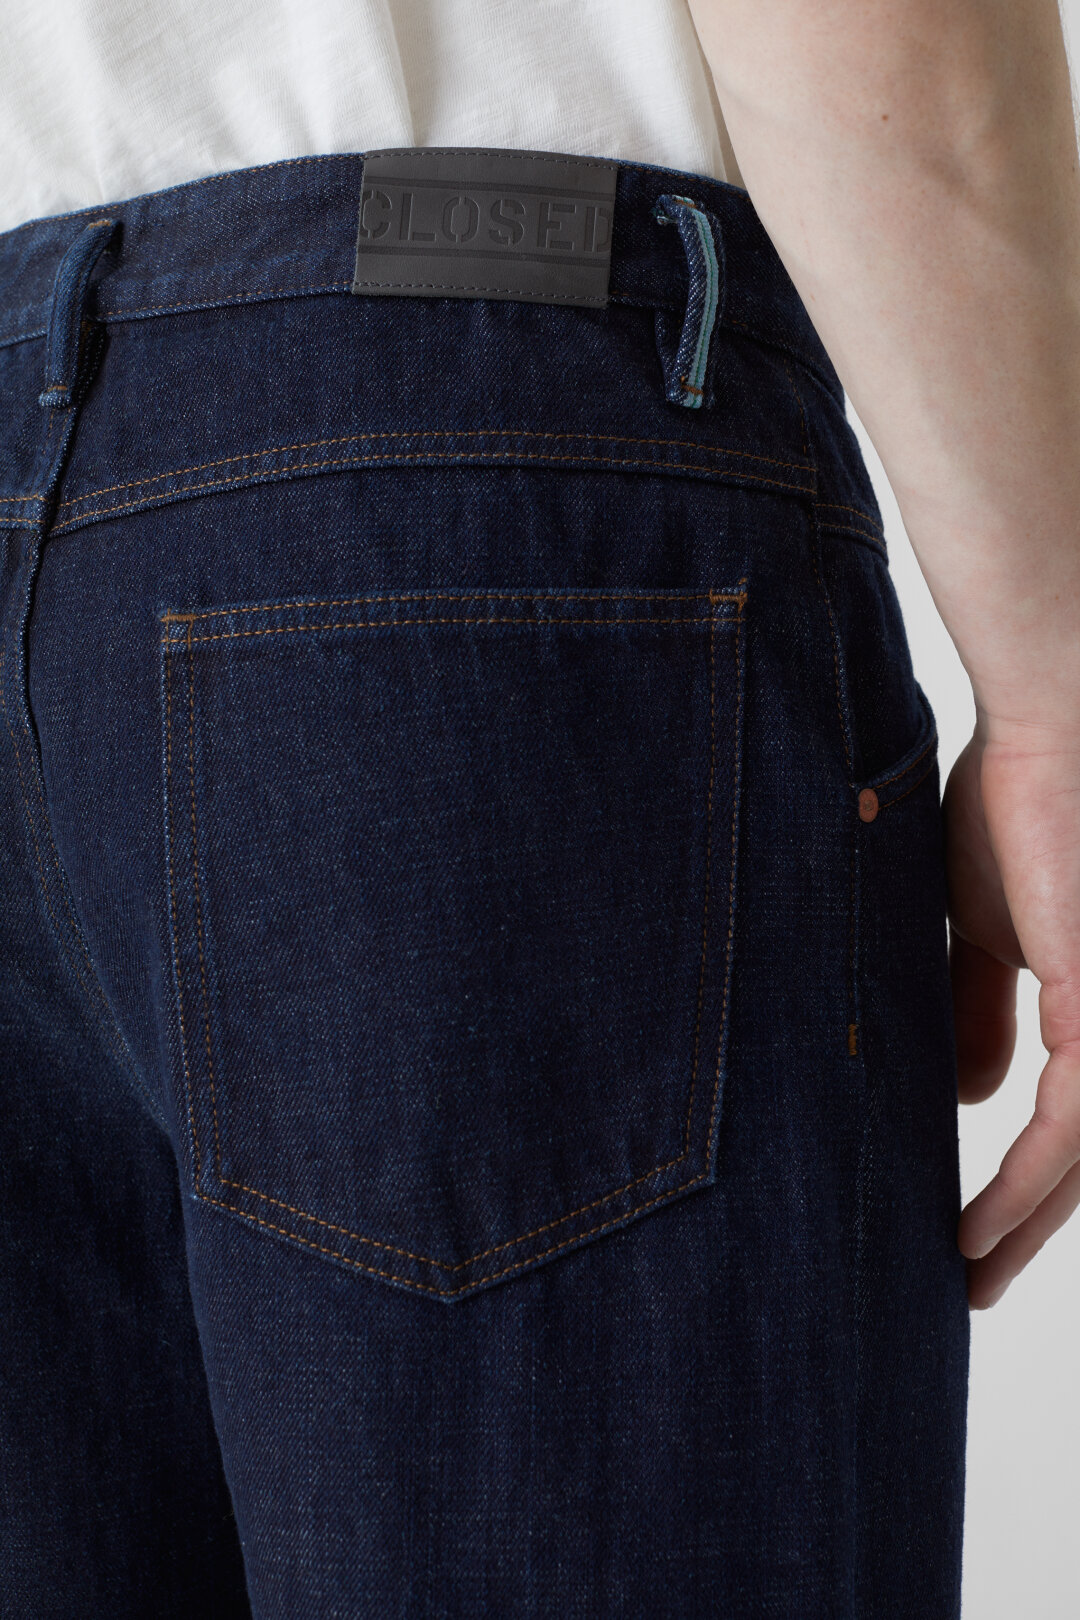 Closed X-Lent Tapered Jeans in Dark Blue